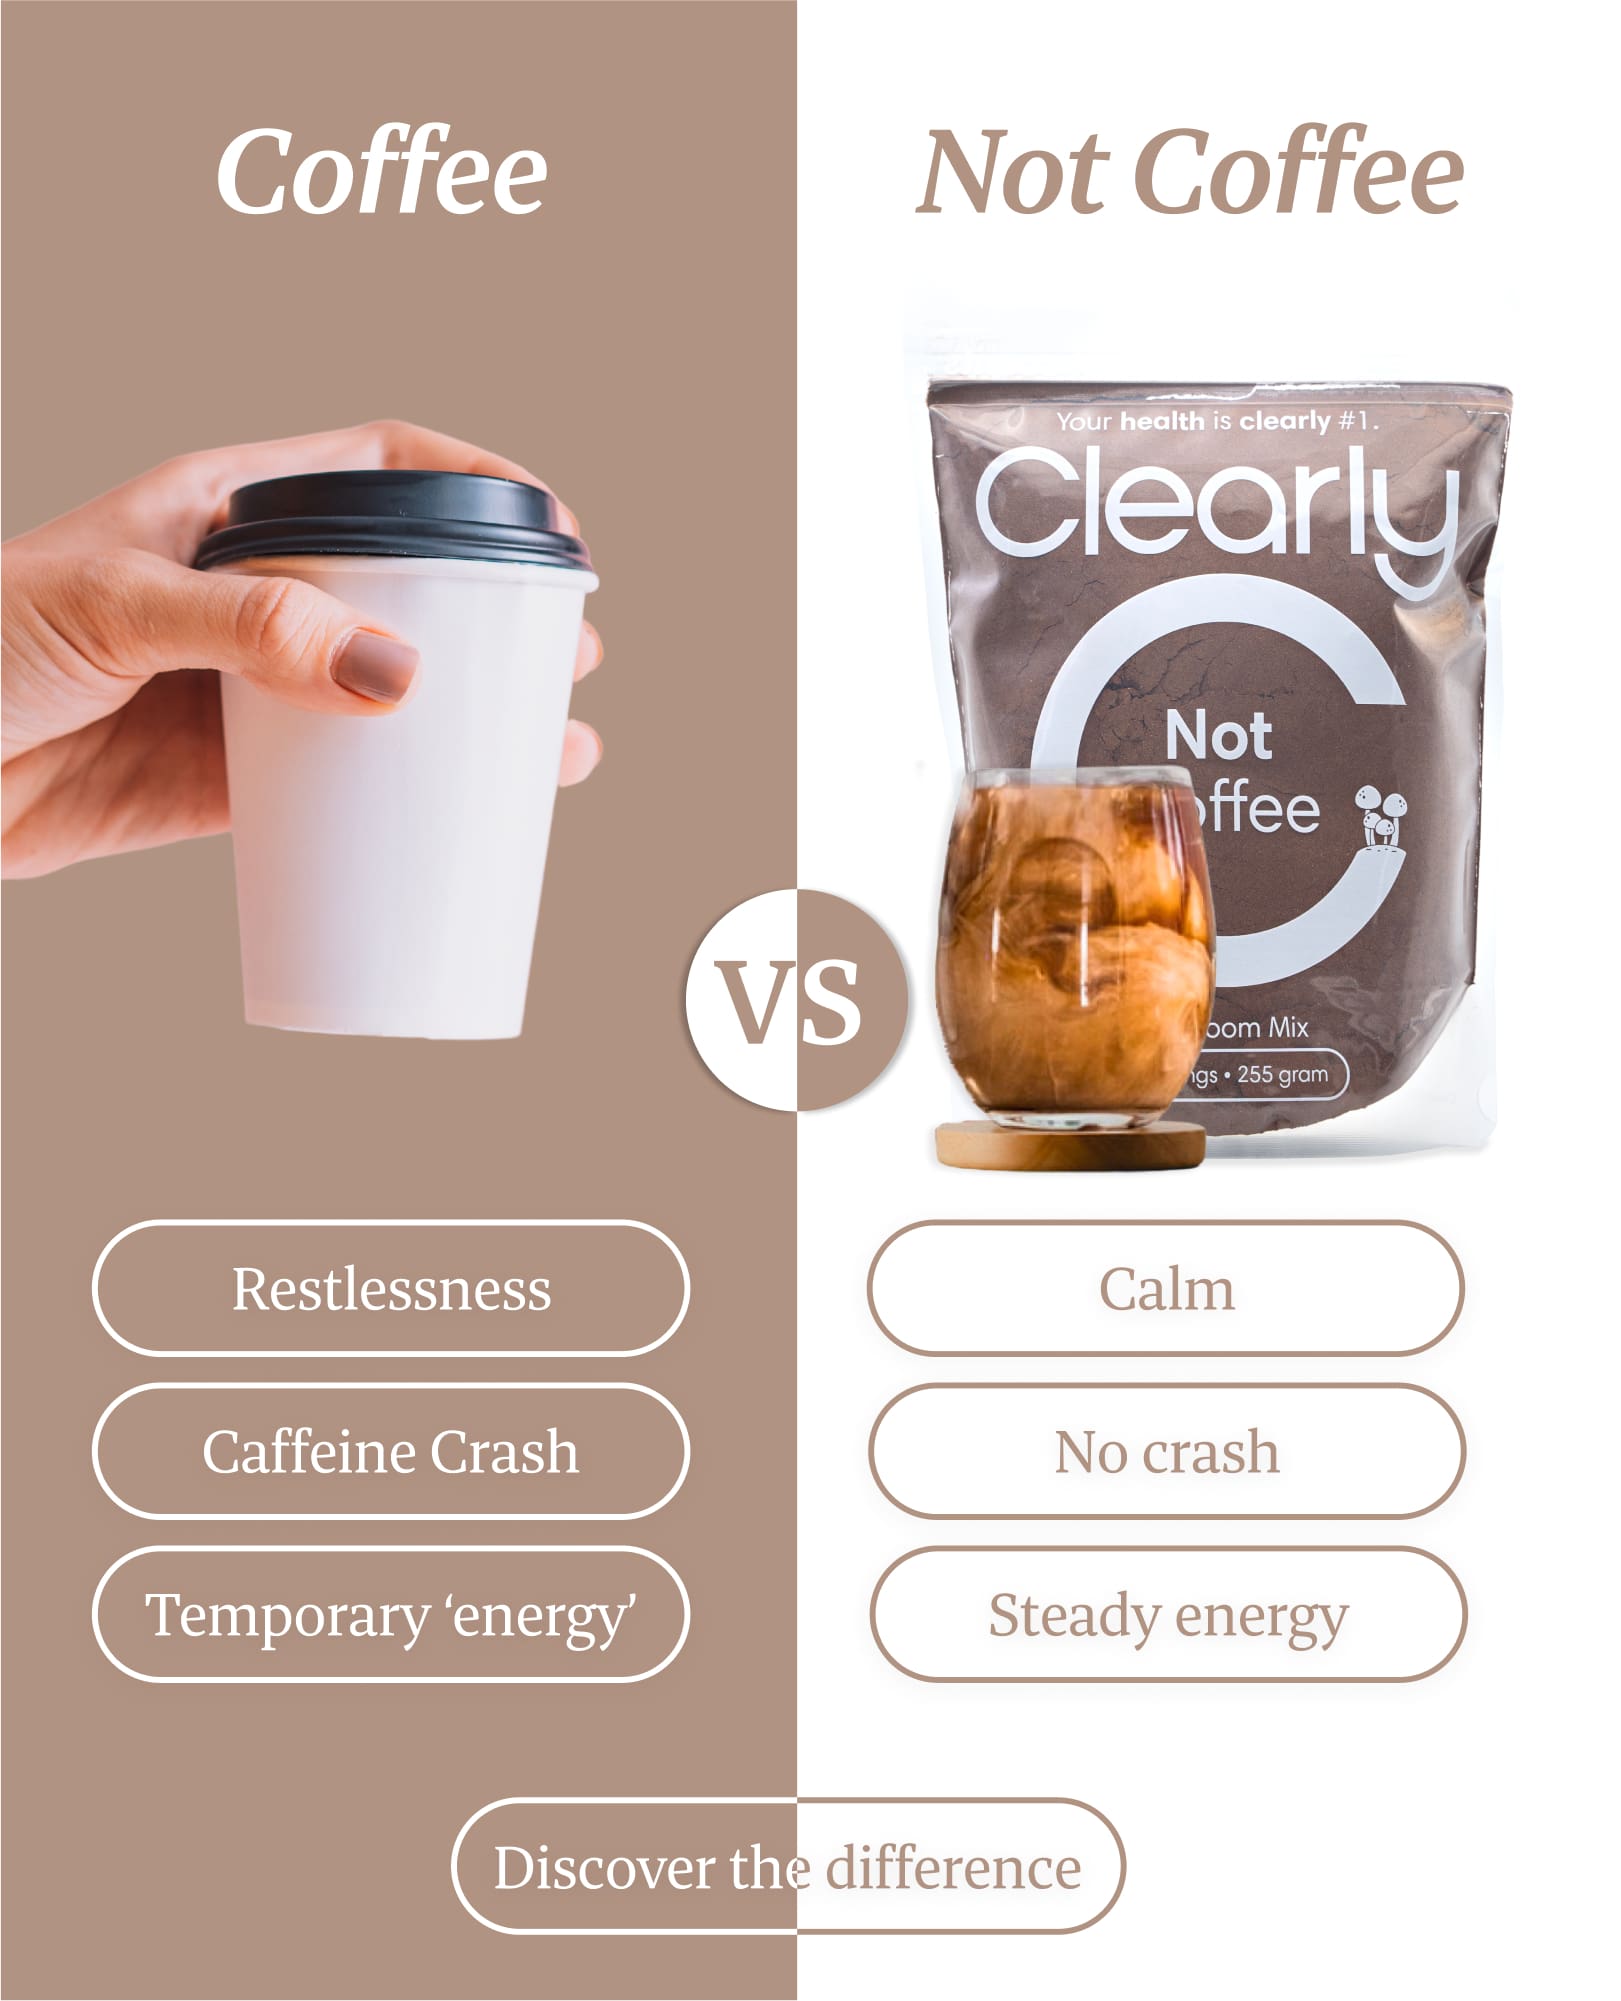 Clearly Not Coffee